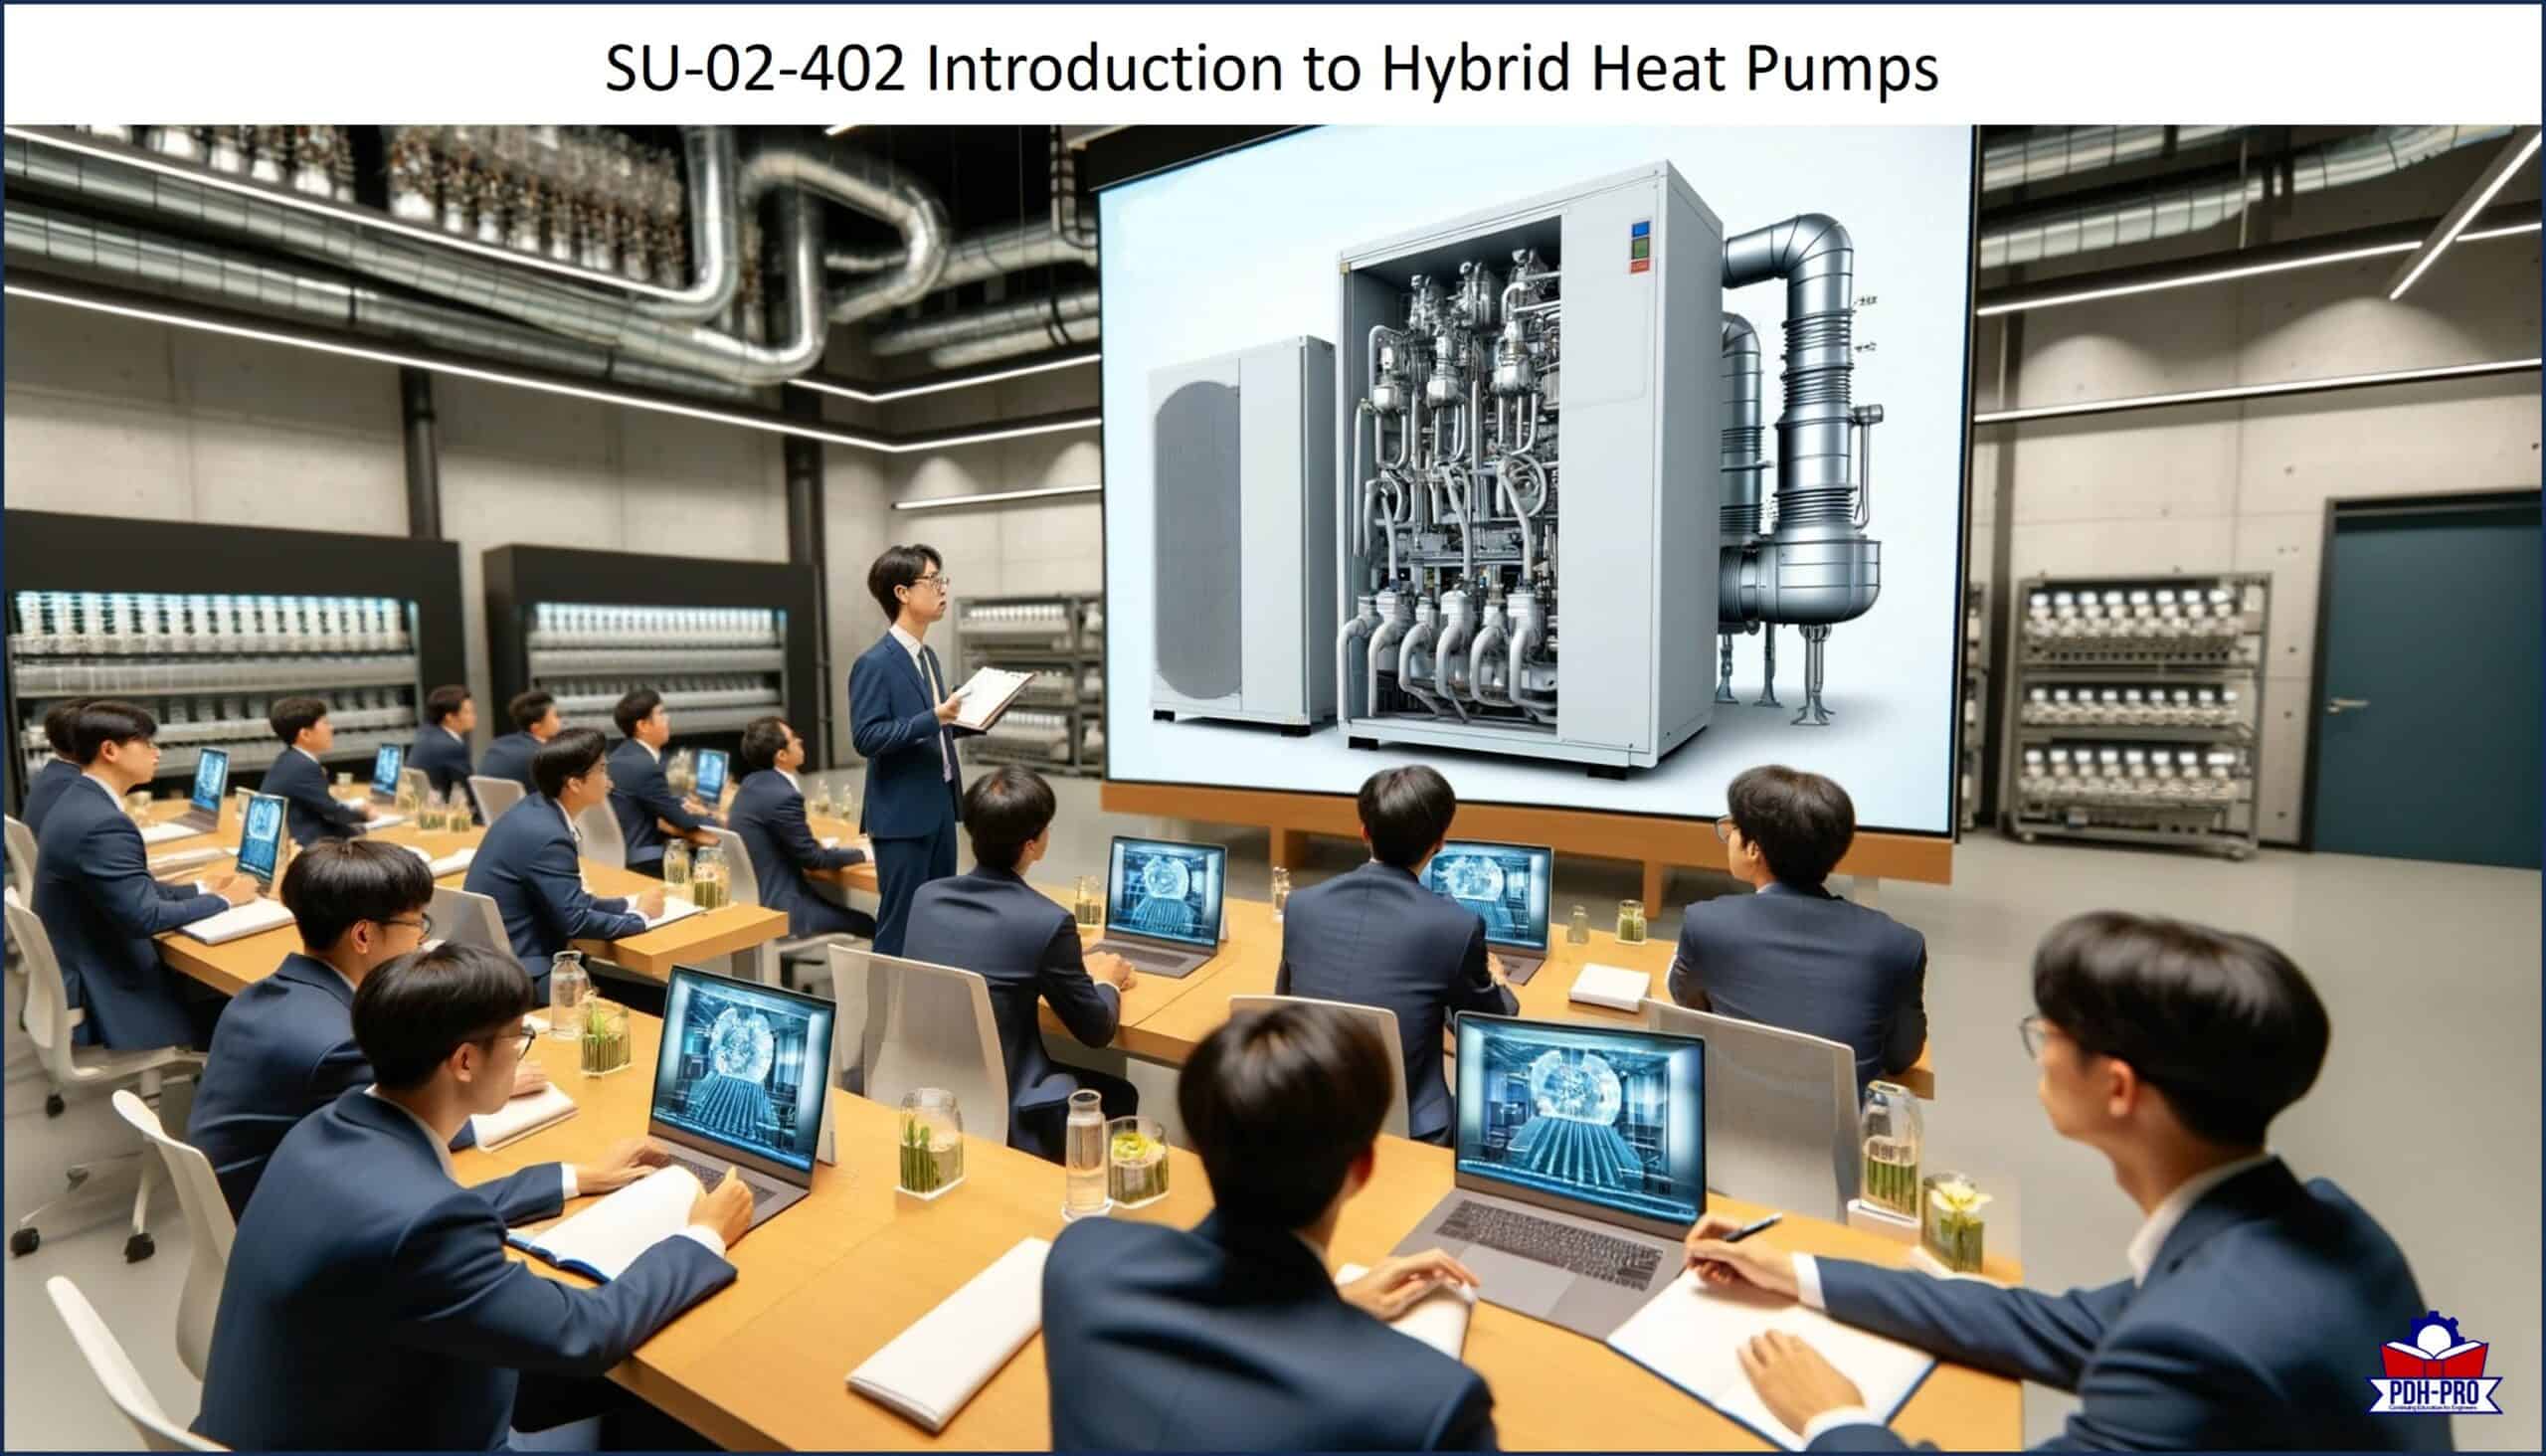 Introduction to Hybrid Heat Pumps